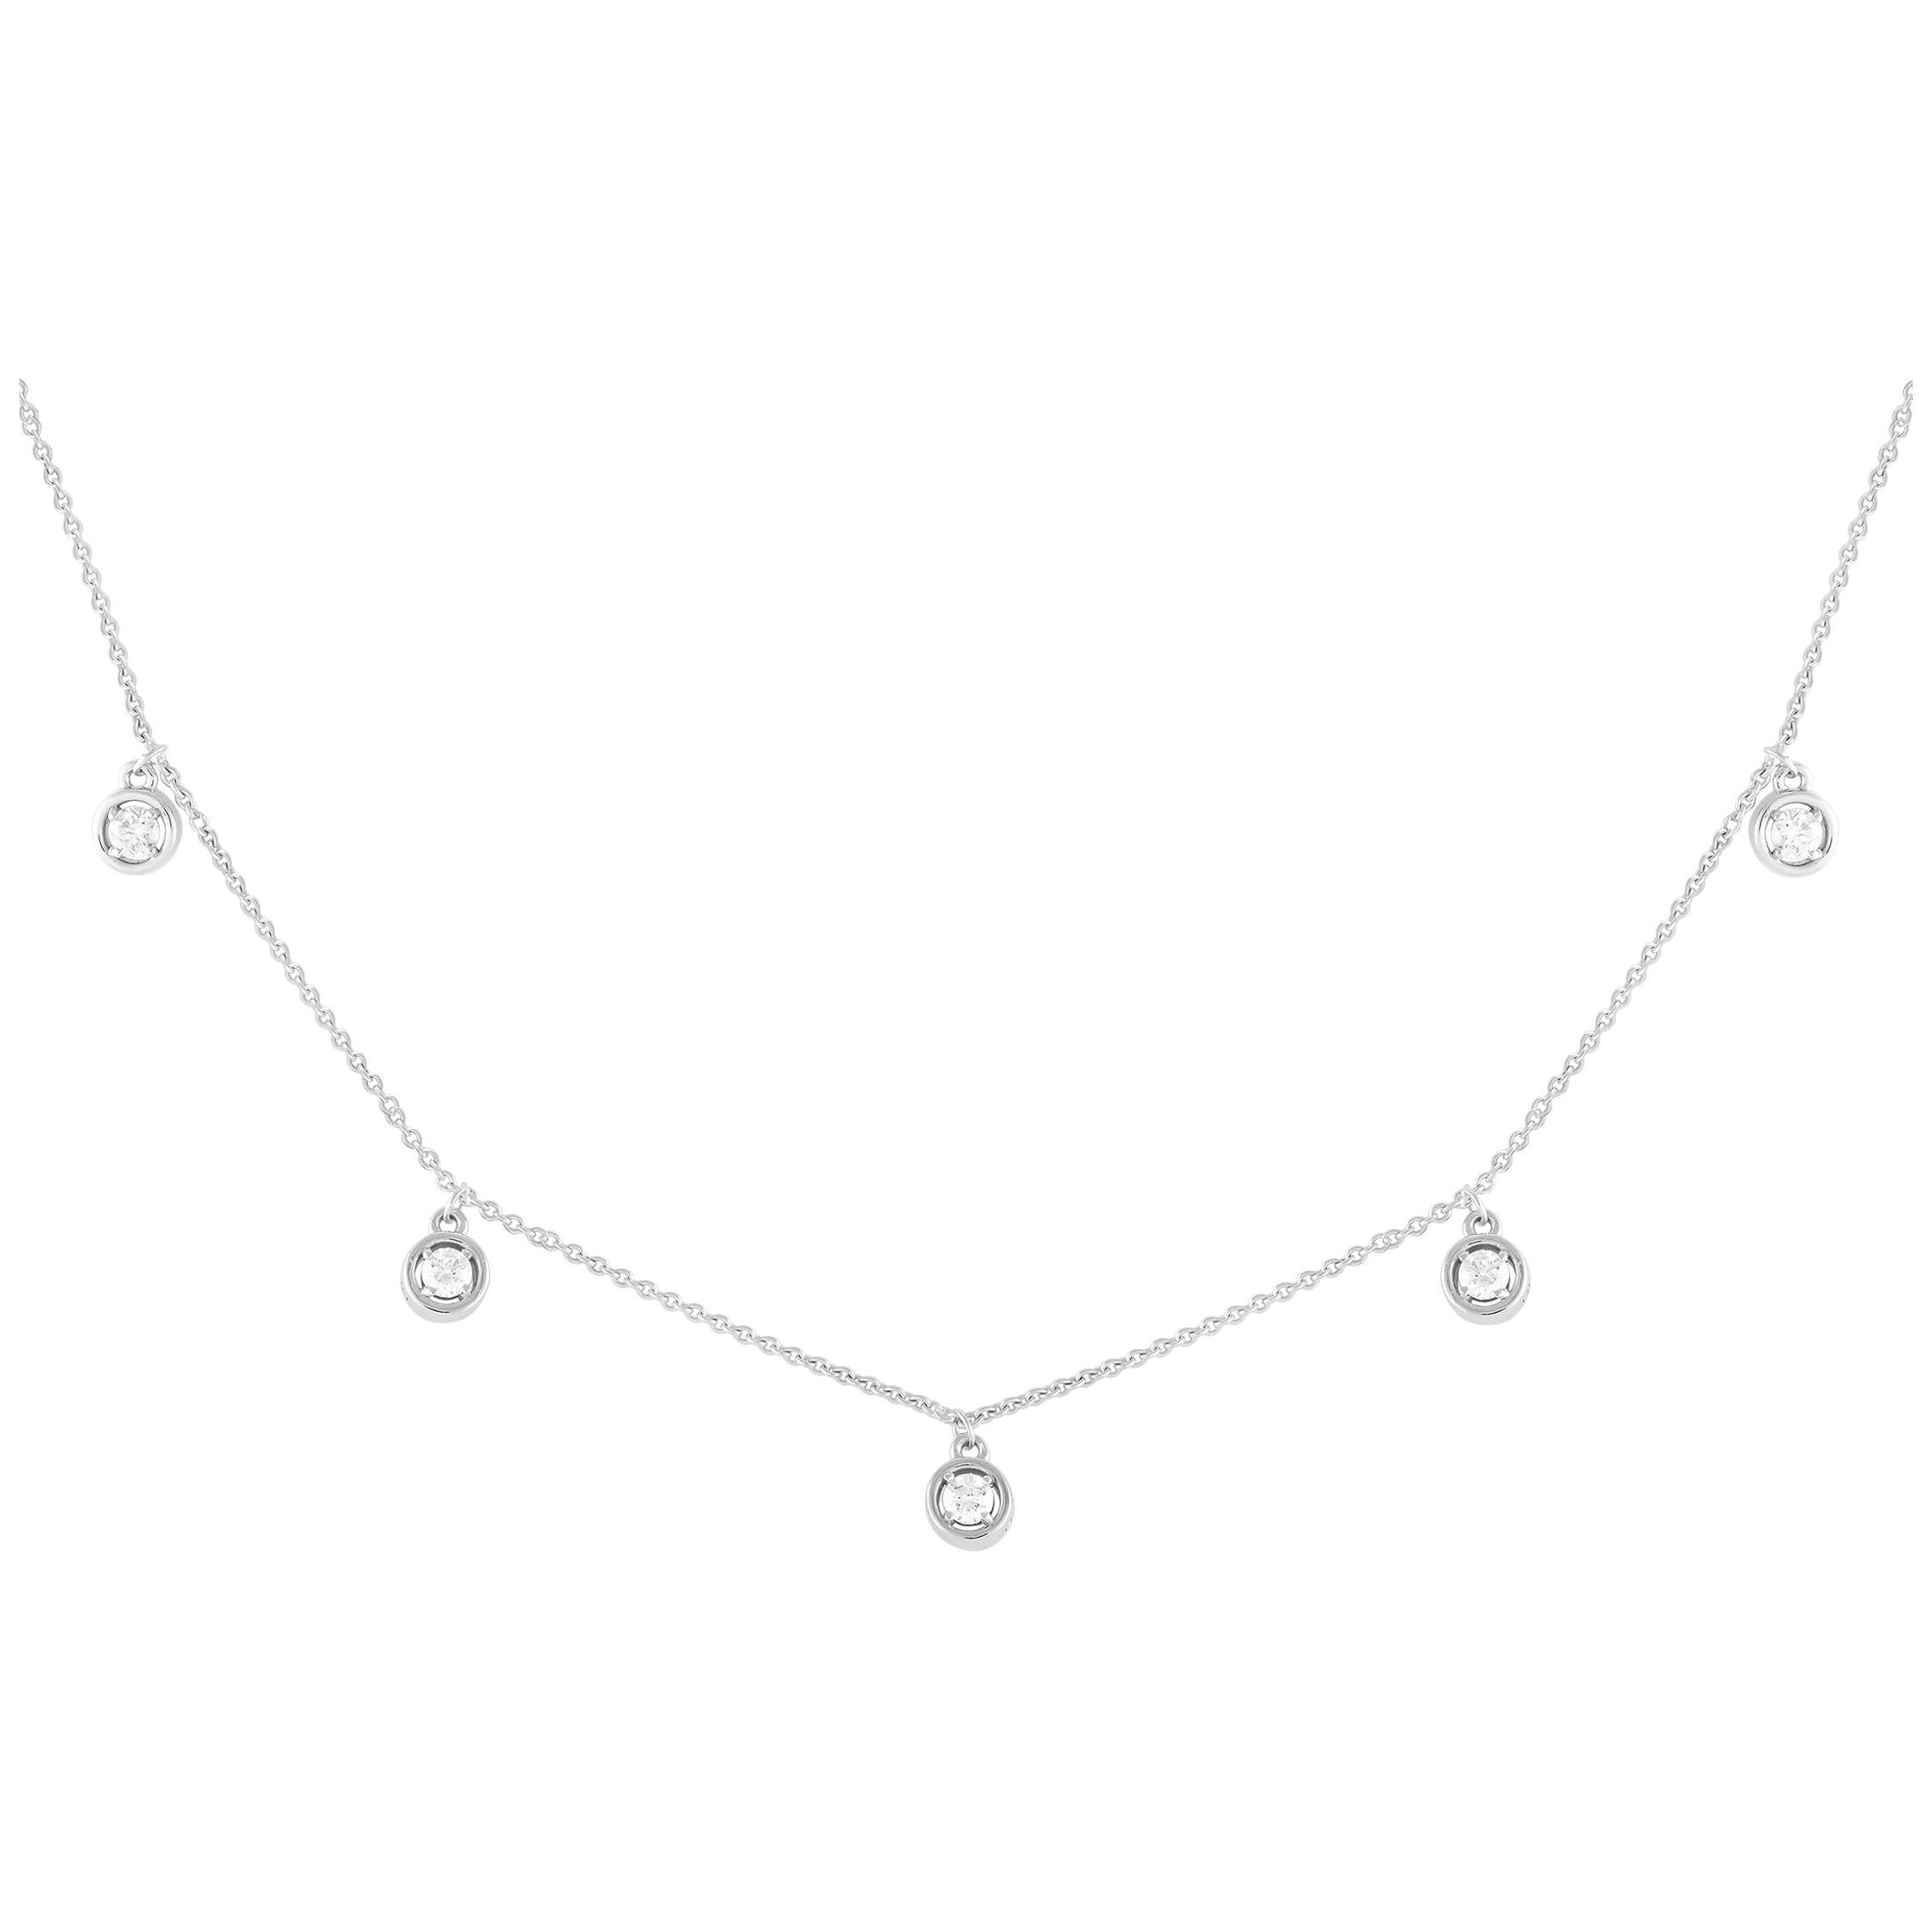 14K White Gold 0.25ct Diamond Station Necklace NK01460-W For Sale